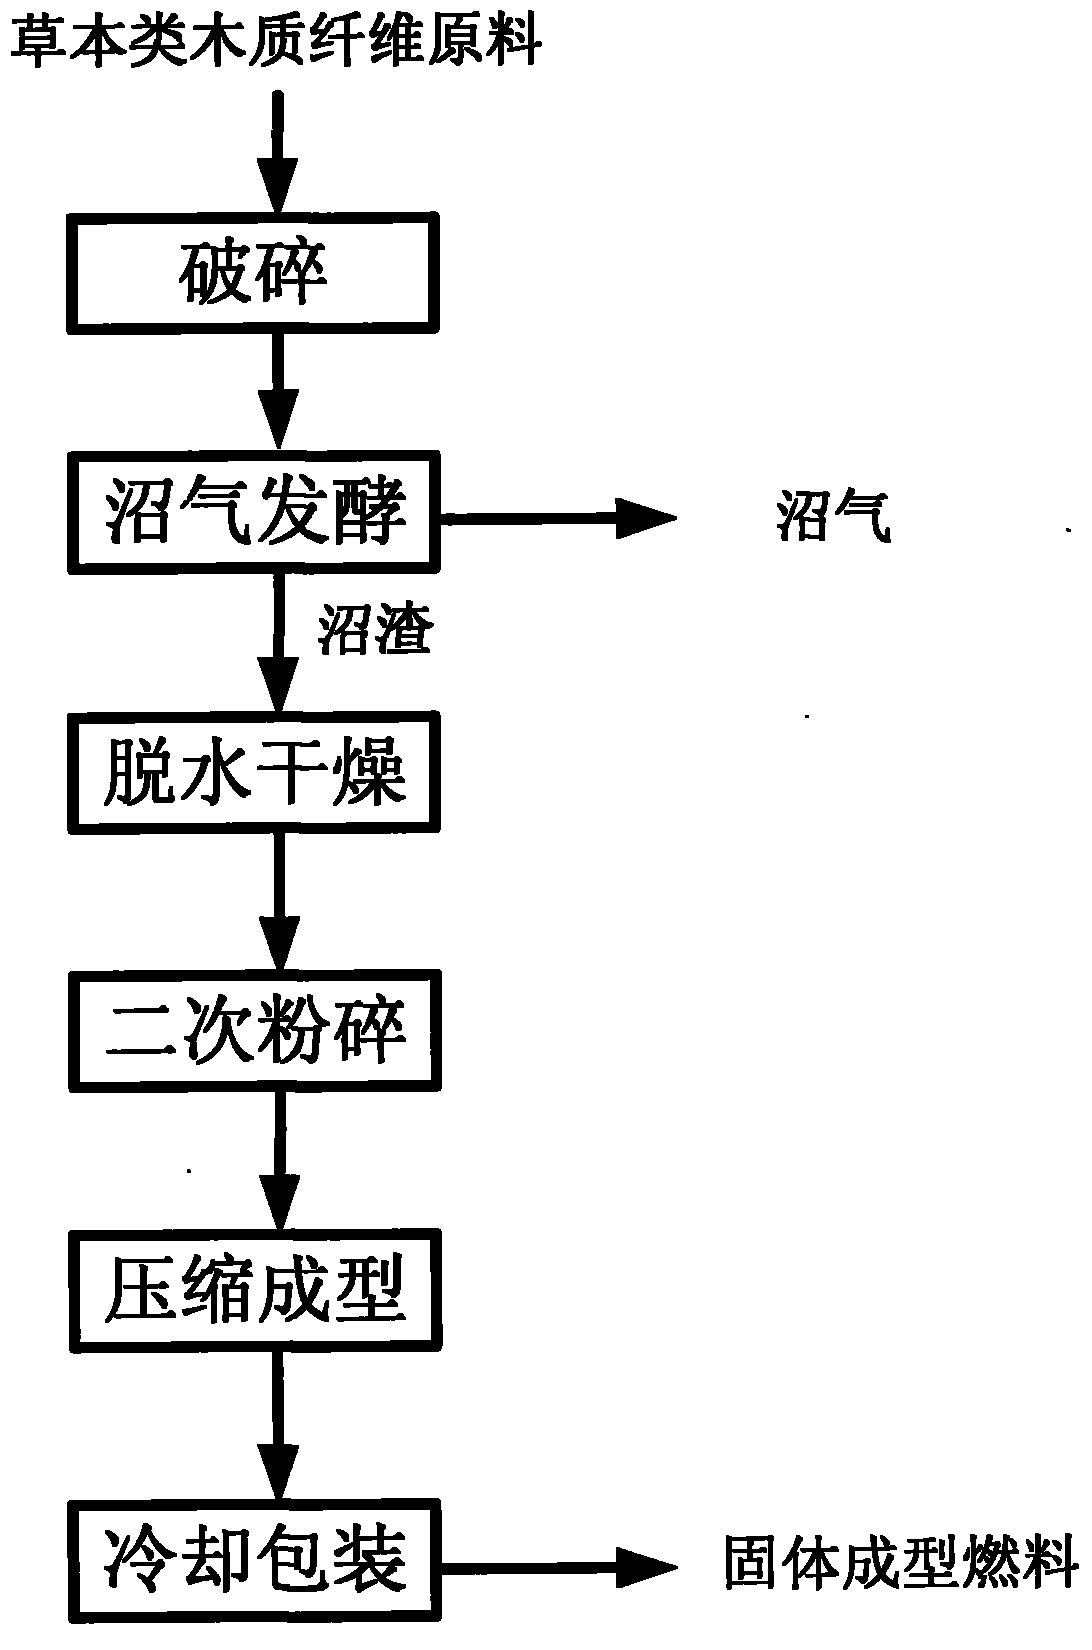 Method for coproducing methane and solid formed fuel by using herbaceous wood fiber as raw material